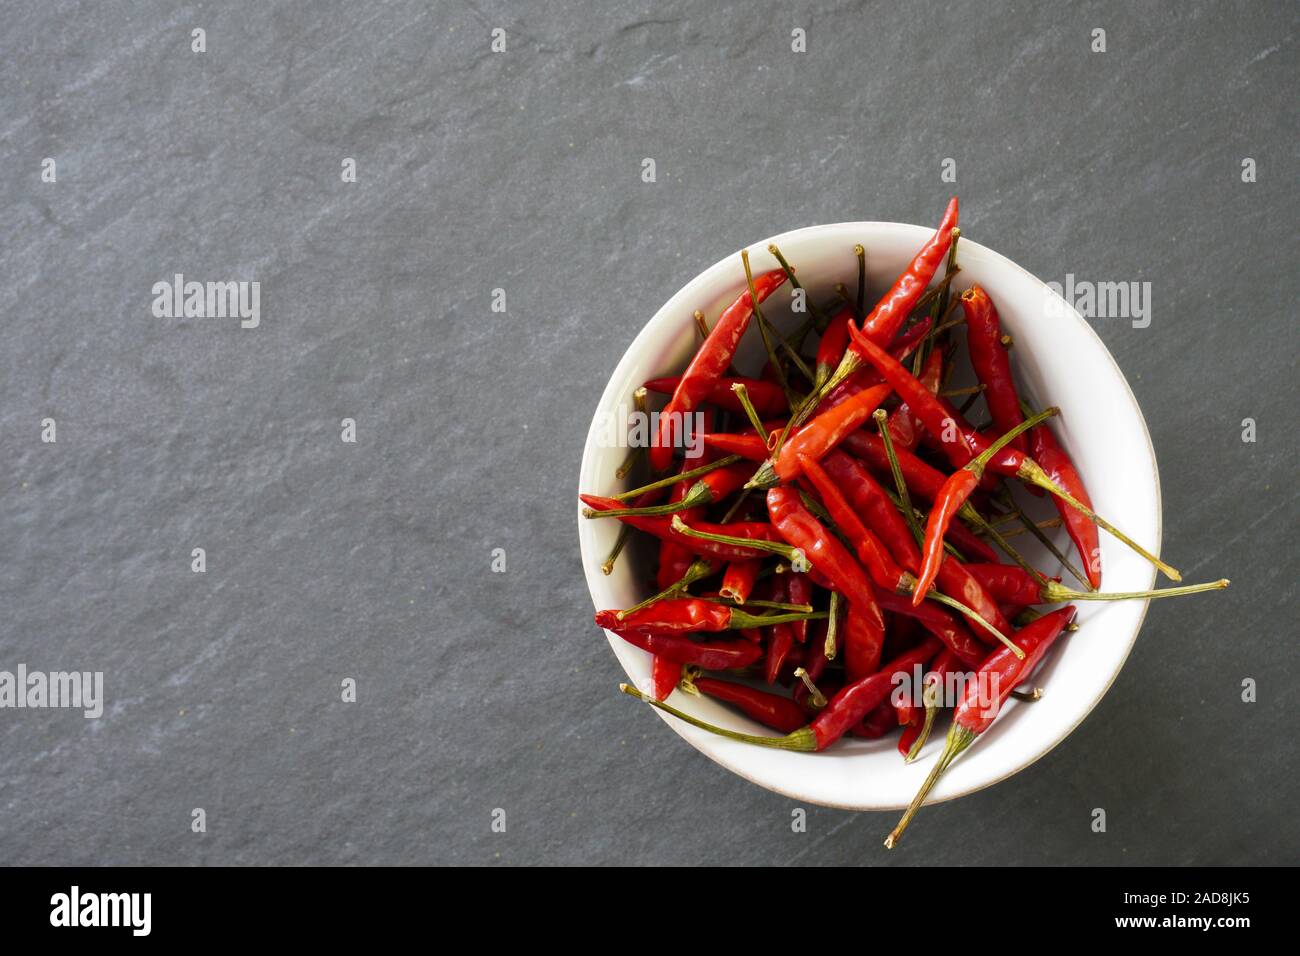 A bowl full of red chiles on a gray background with copy space on the ieft of the image Stock Photo